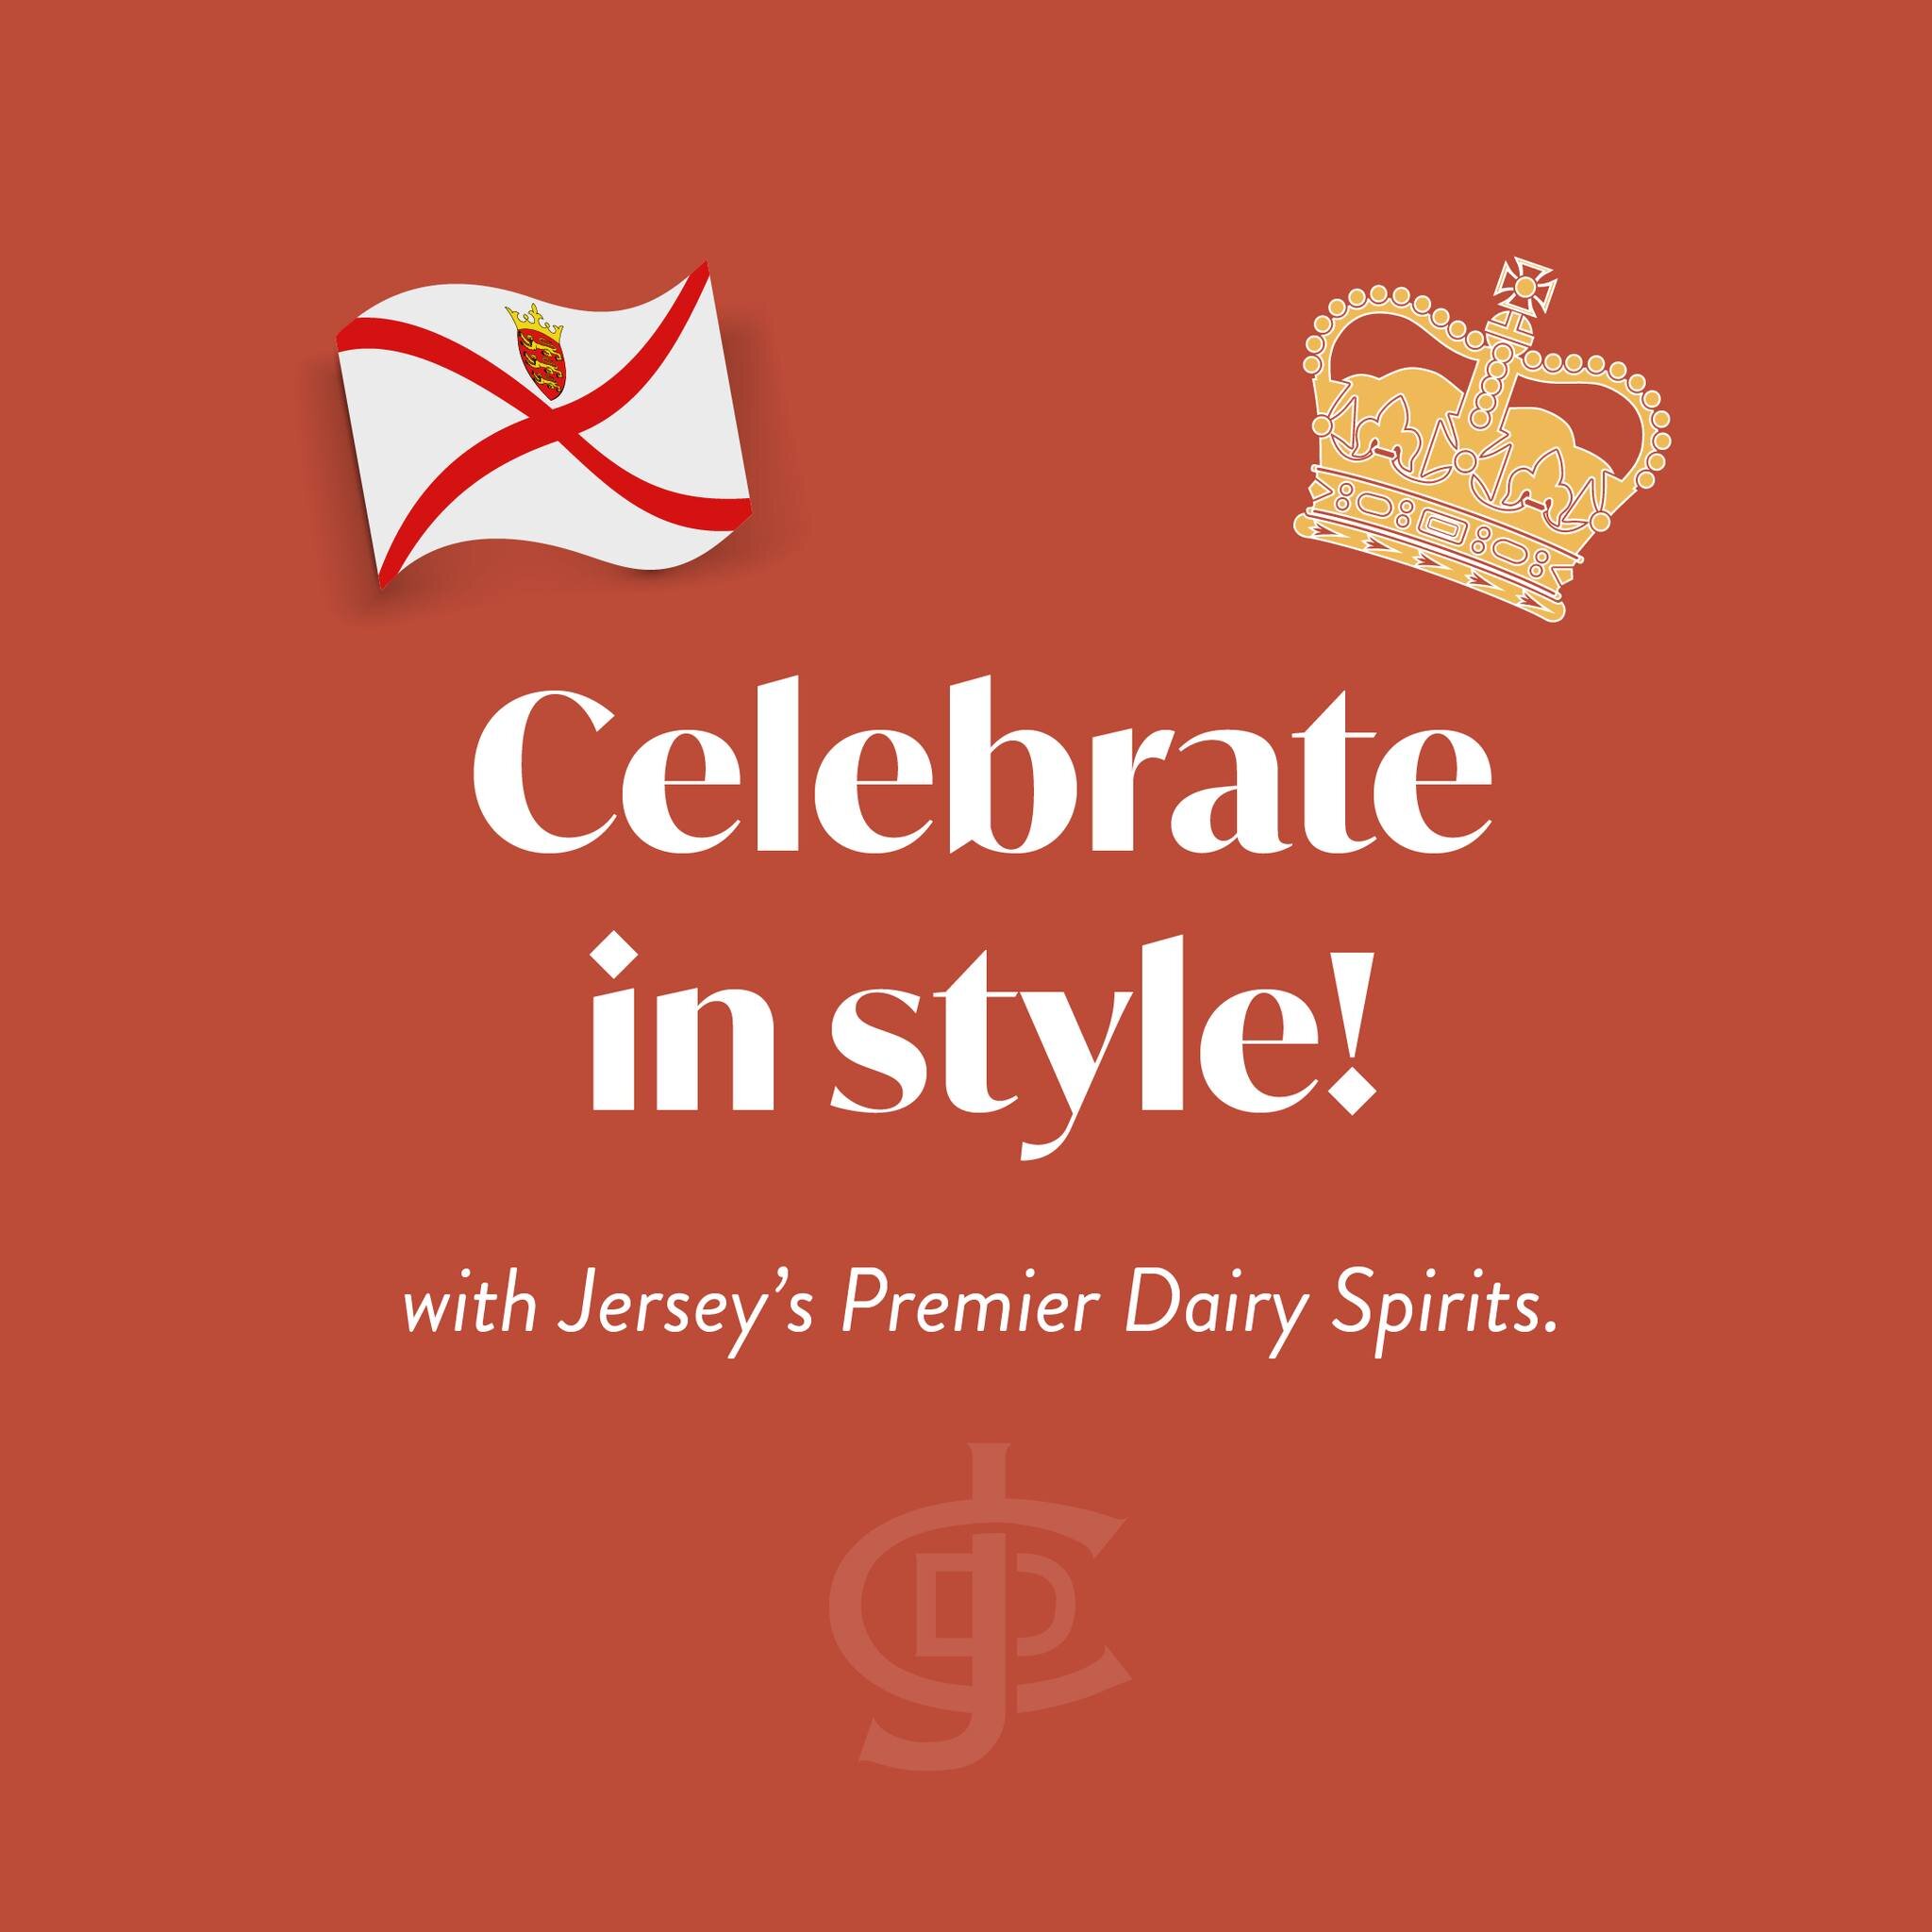 We&rsquo;ve got just what you need to make your patriotic celebrations a little extra special. Our Premier Dairy Spirits will take any occasion up a level! 🇯🇪 🇬🇧

Whether it's a simple G&amp;T to toast the new King or one of our Signature Cocktai